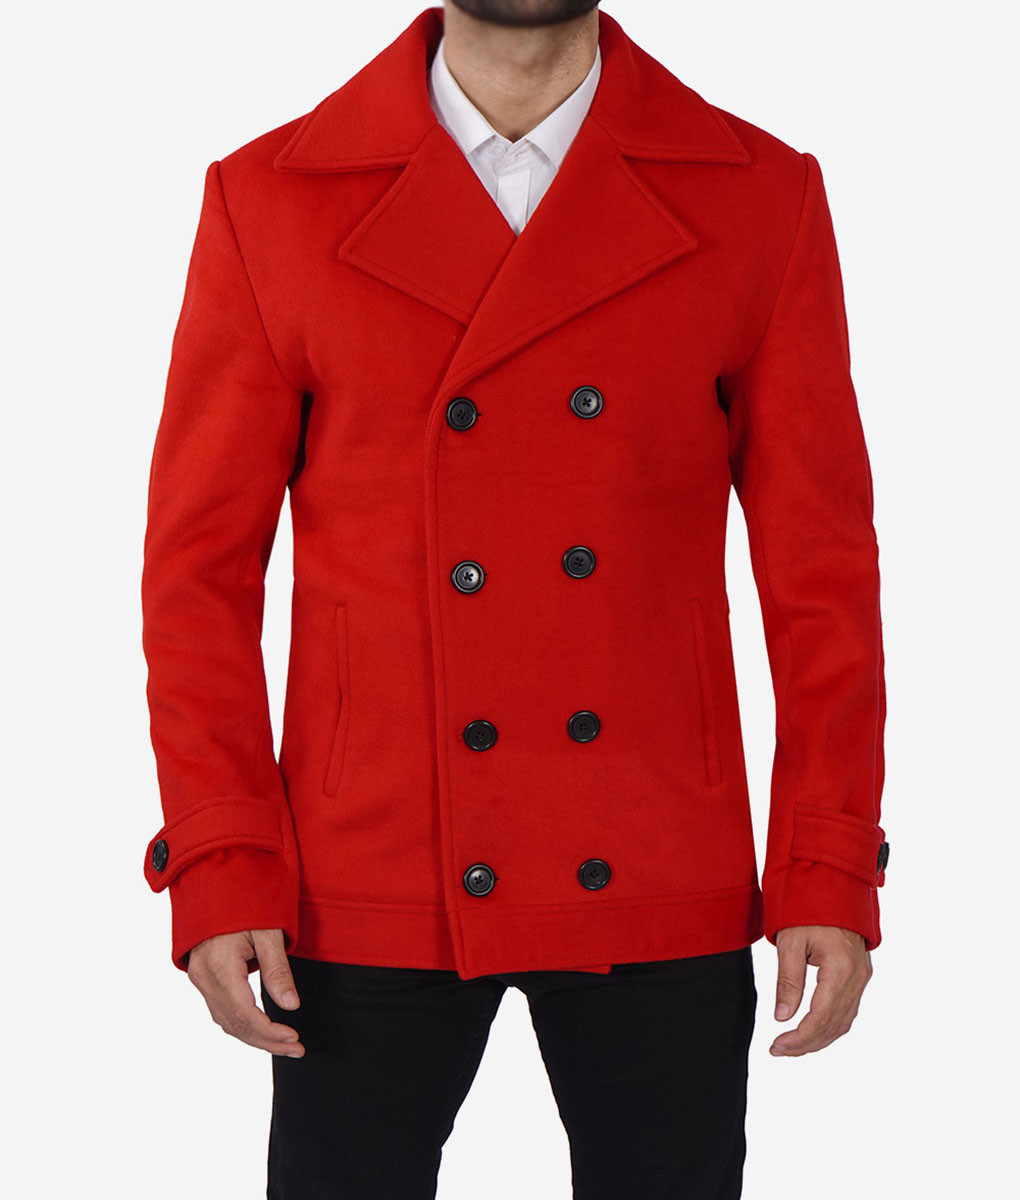 Robert Mens Red Double-Breasted Wool Pea Coat